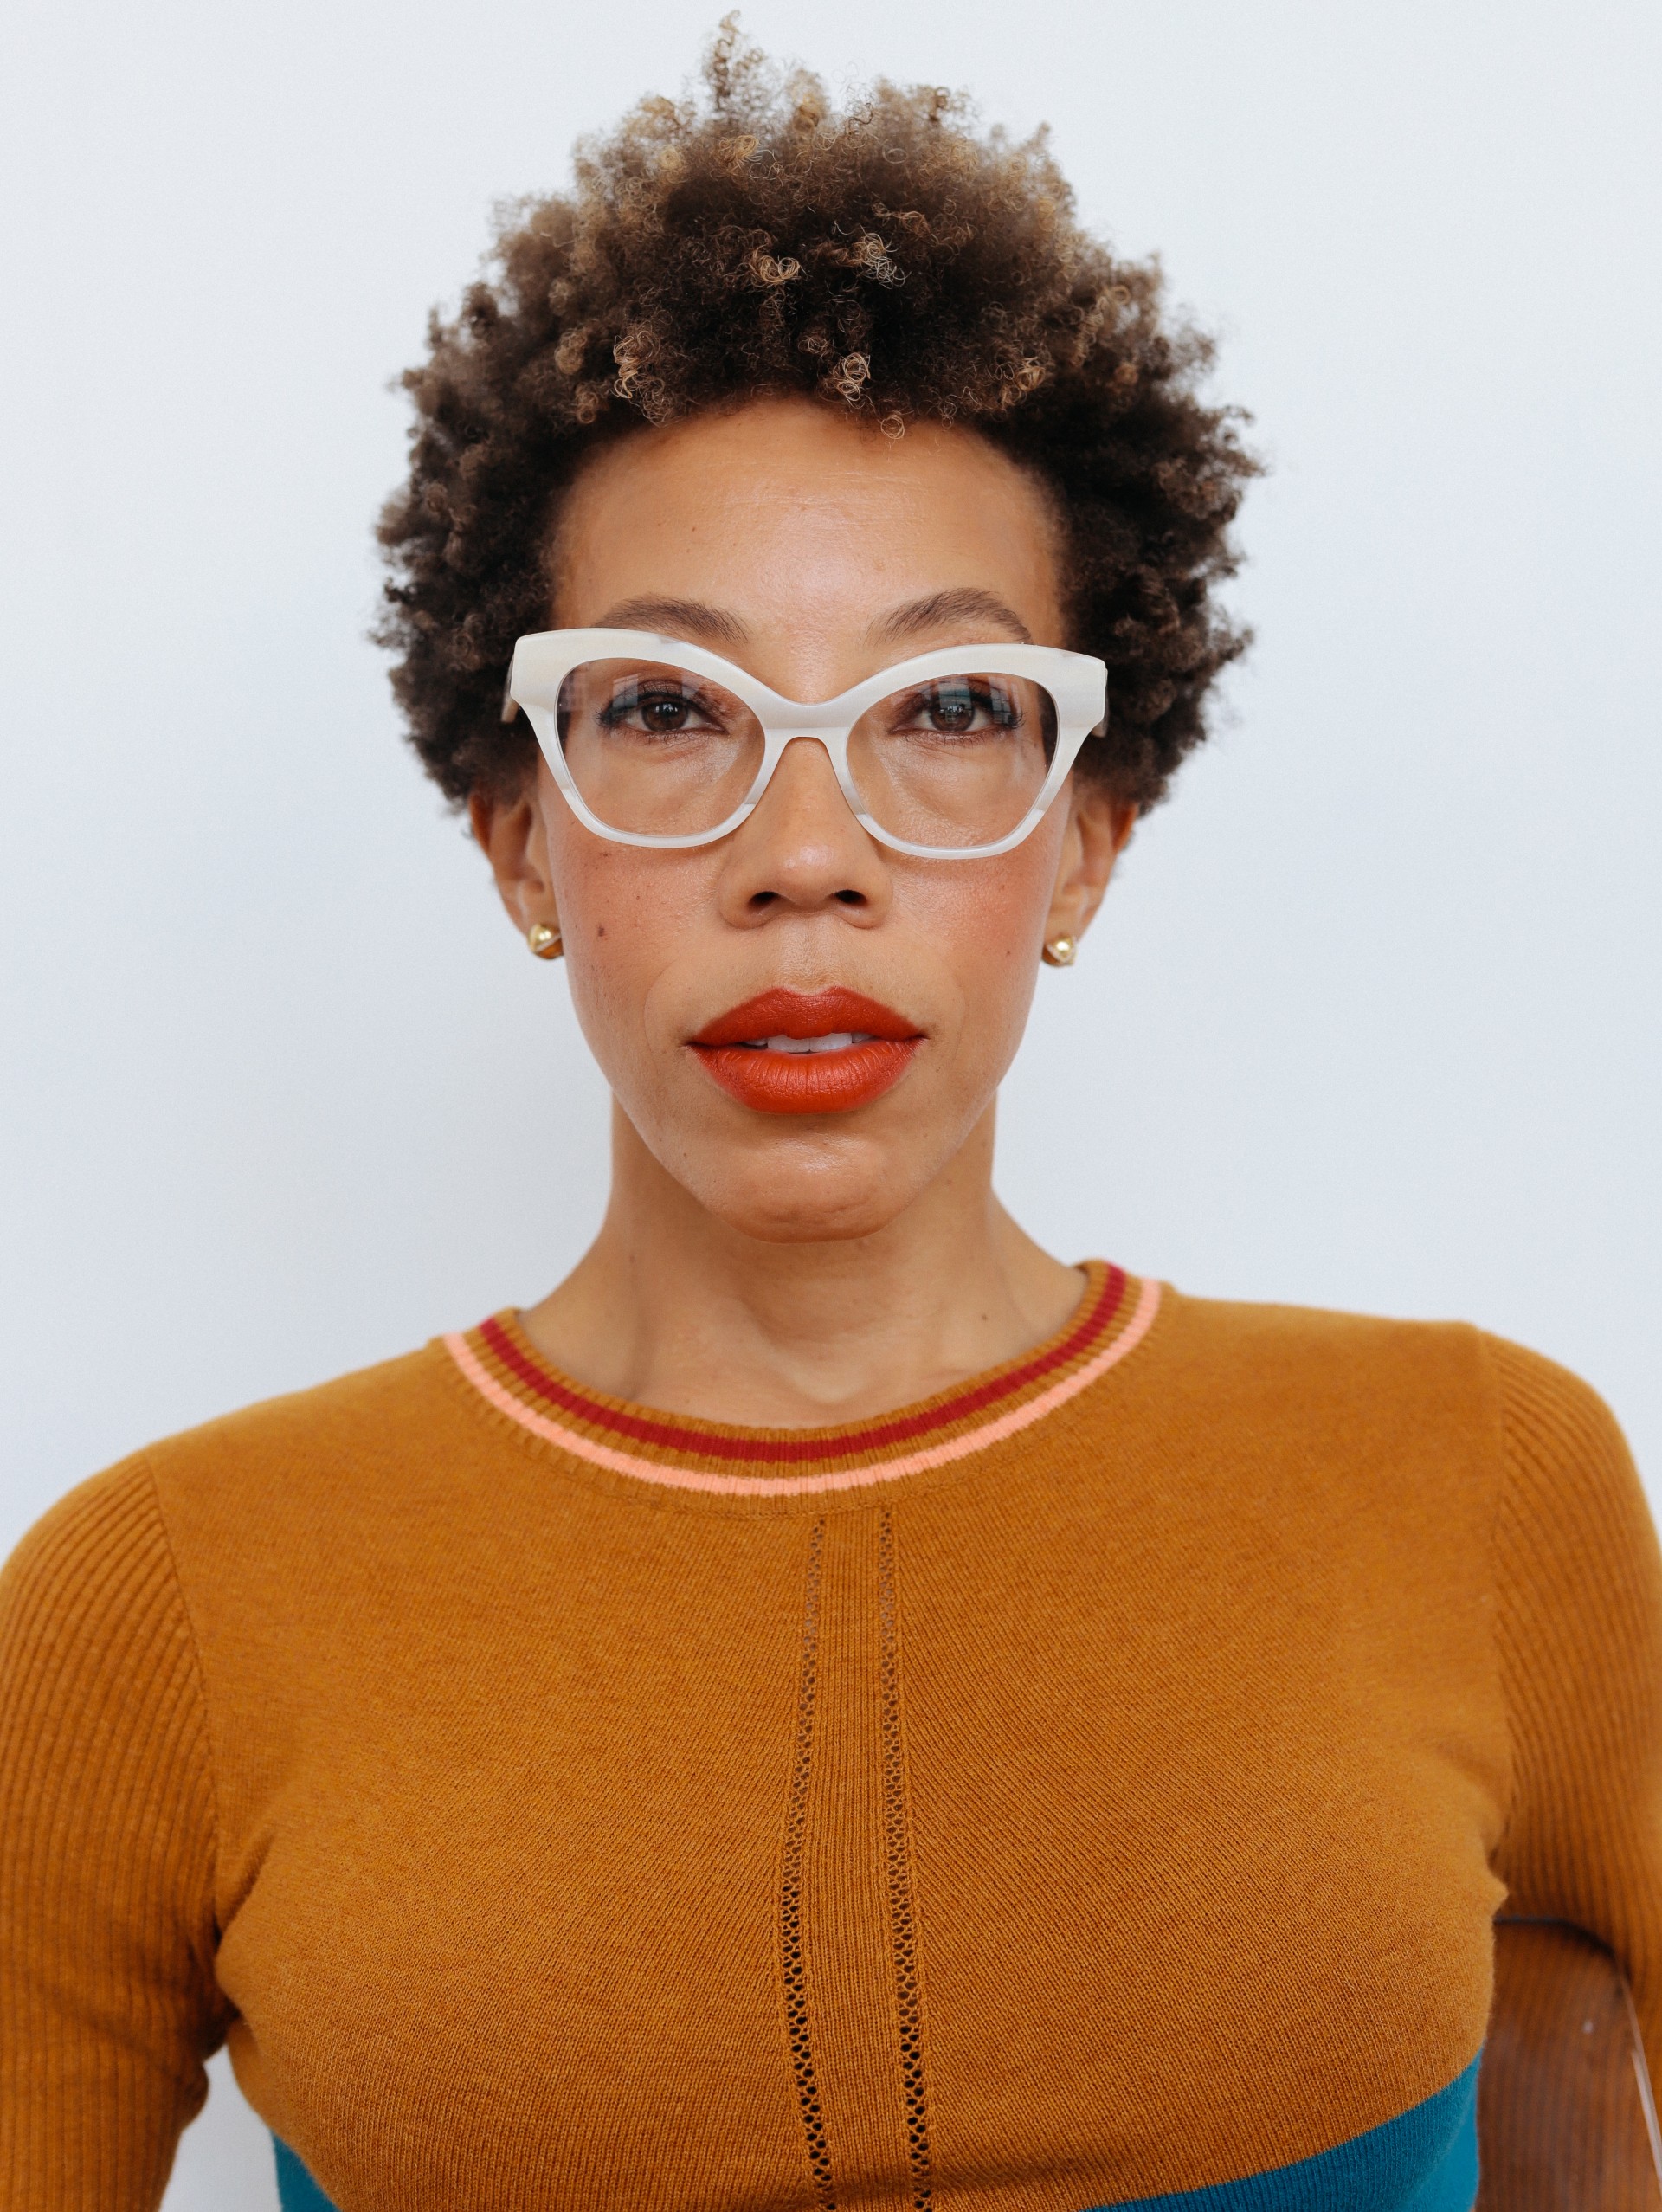 A headshot of Amy Sherald. She is wearing white-framed glasses and a tan sweater. She is looking directly at the camera with a thoughtful expression.